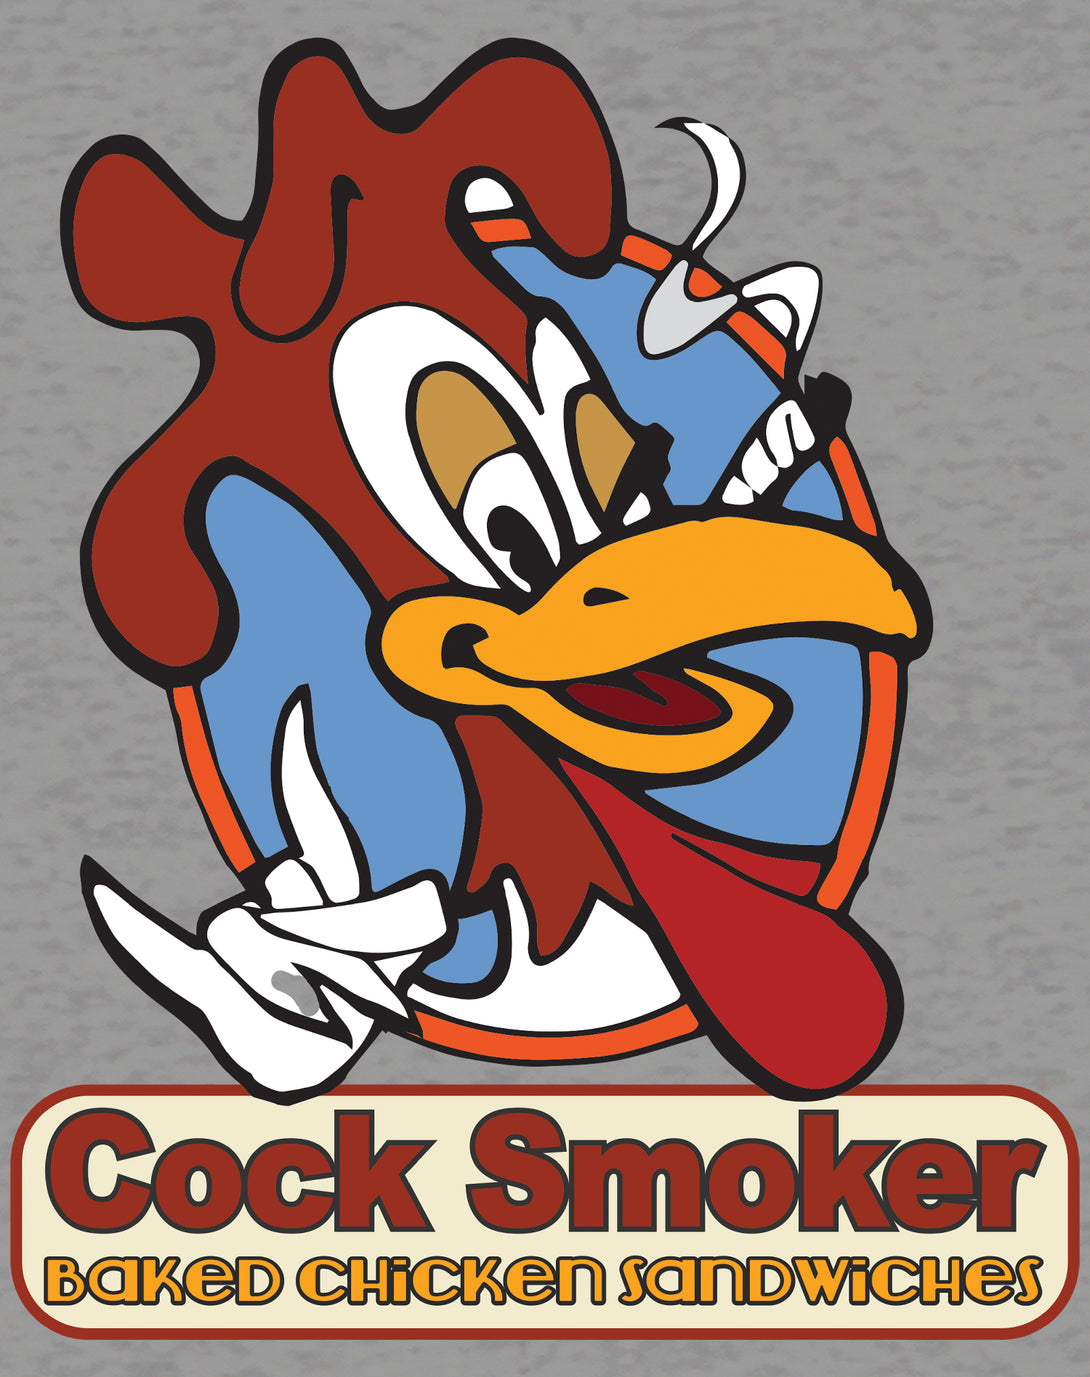 Kevin Smith Jay & Silent Bob Reboot Cock Smoker Baked Chicken Sandwiches Logo Official Men's T-Shirt Sports Grey - Urban Species Design Close Up